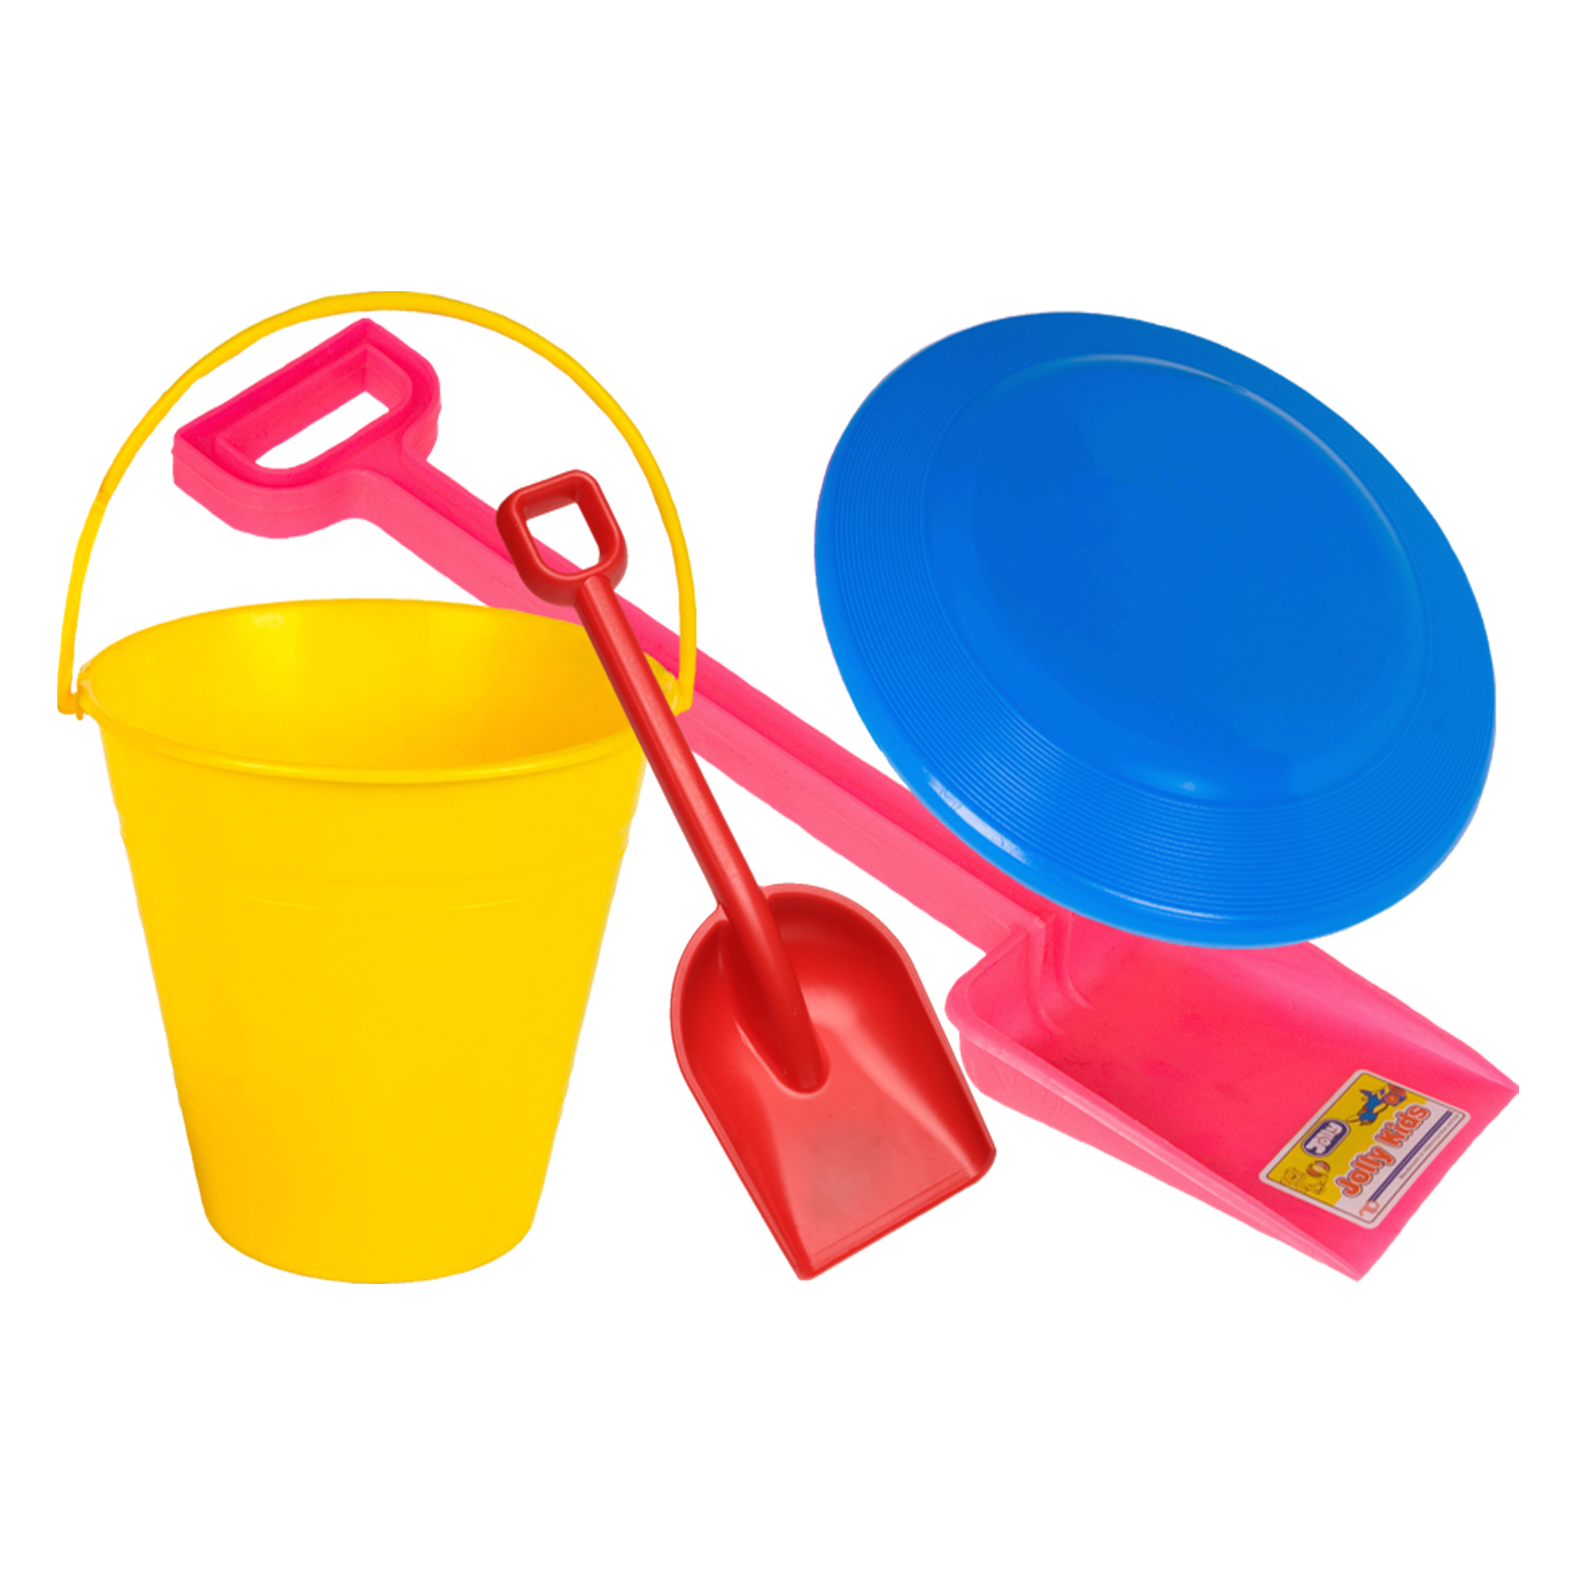 Children Will Enjoy Building Sandcastles. Transporting Water. And Helping With Gardening Tasks. Non-Toxic Play Buckets.